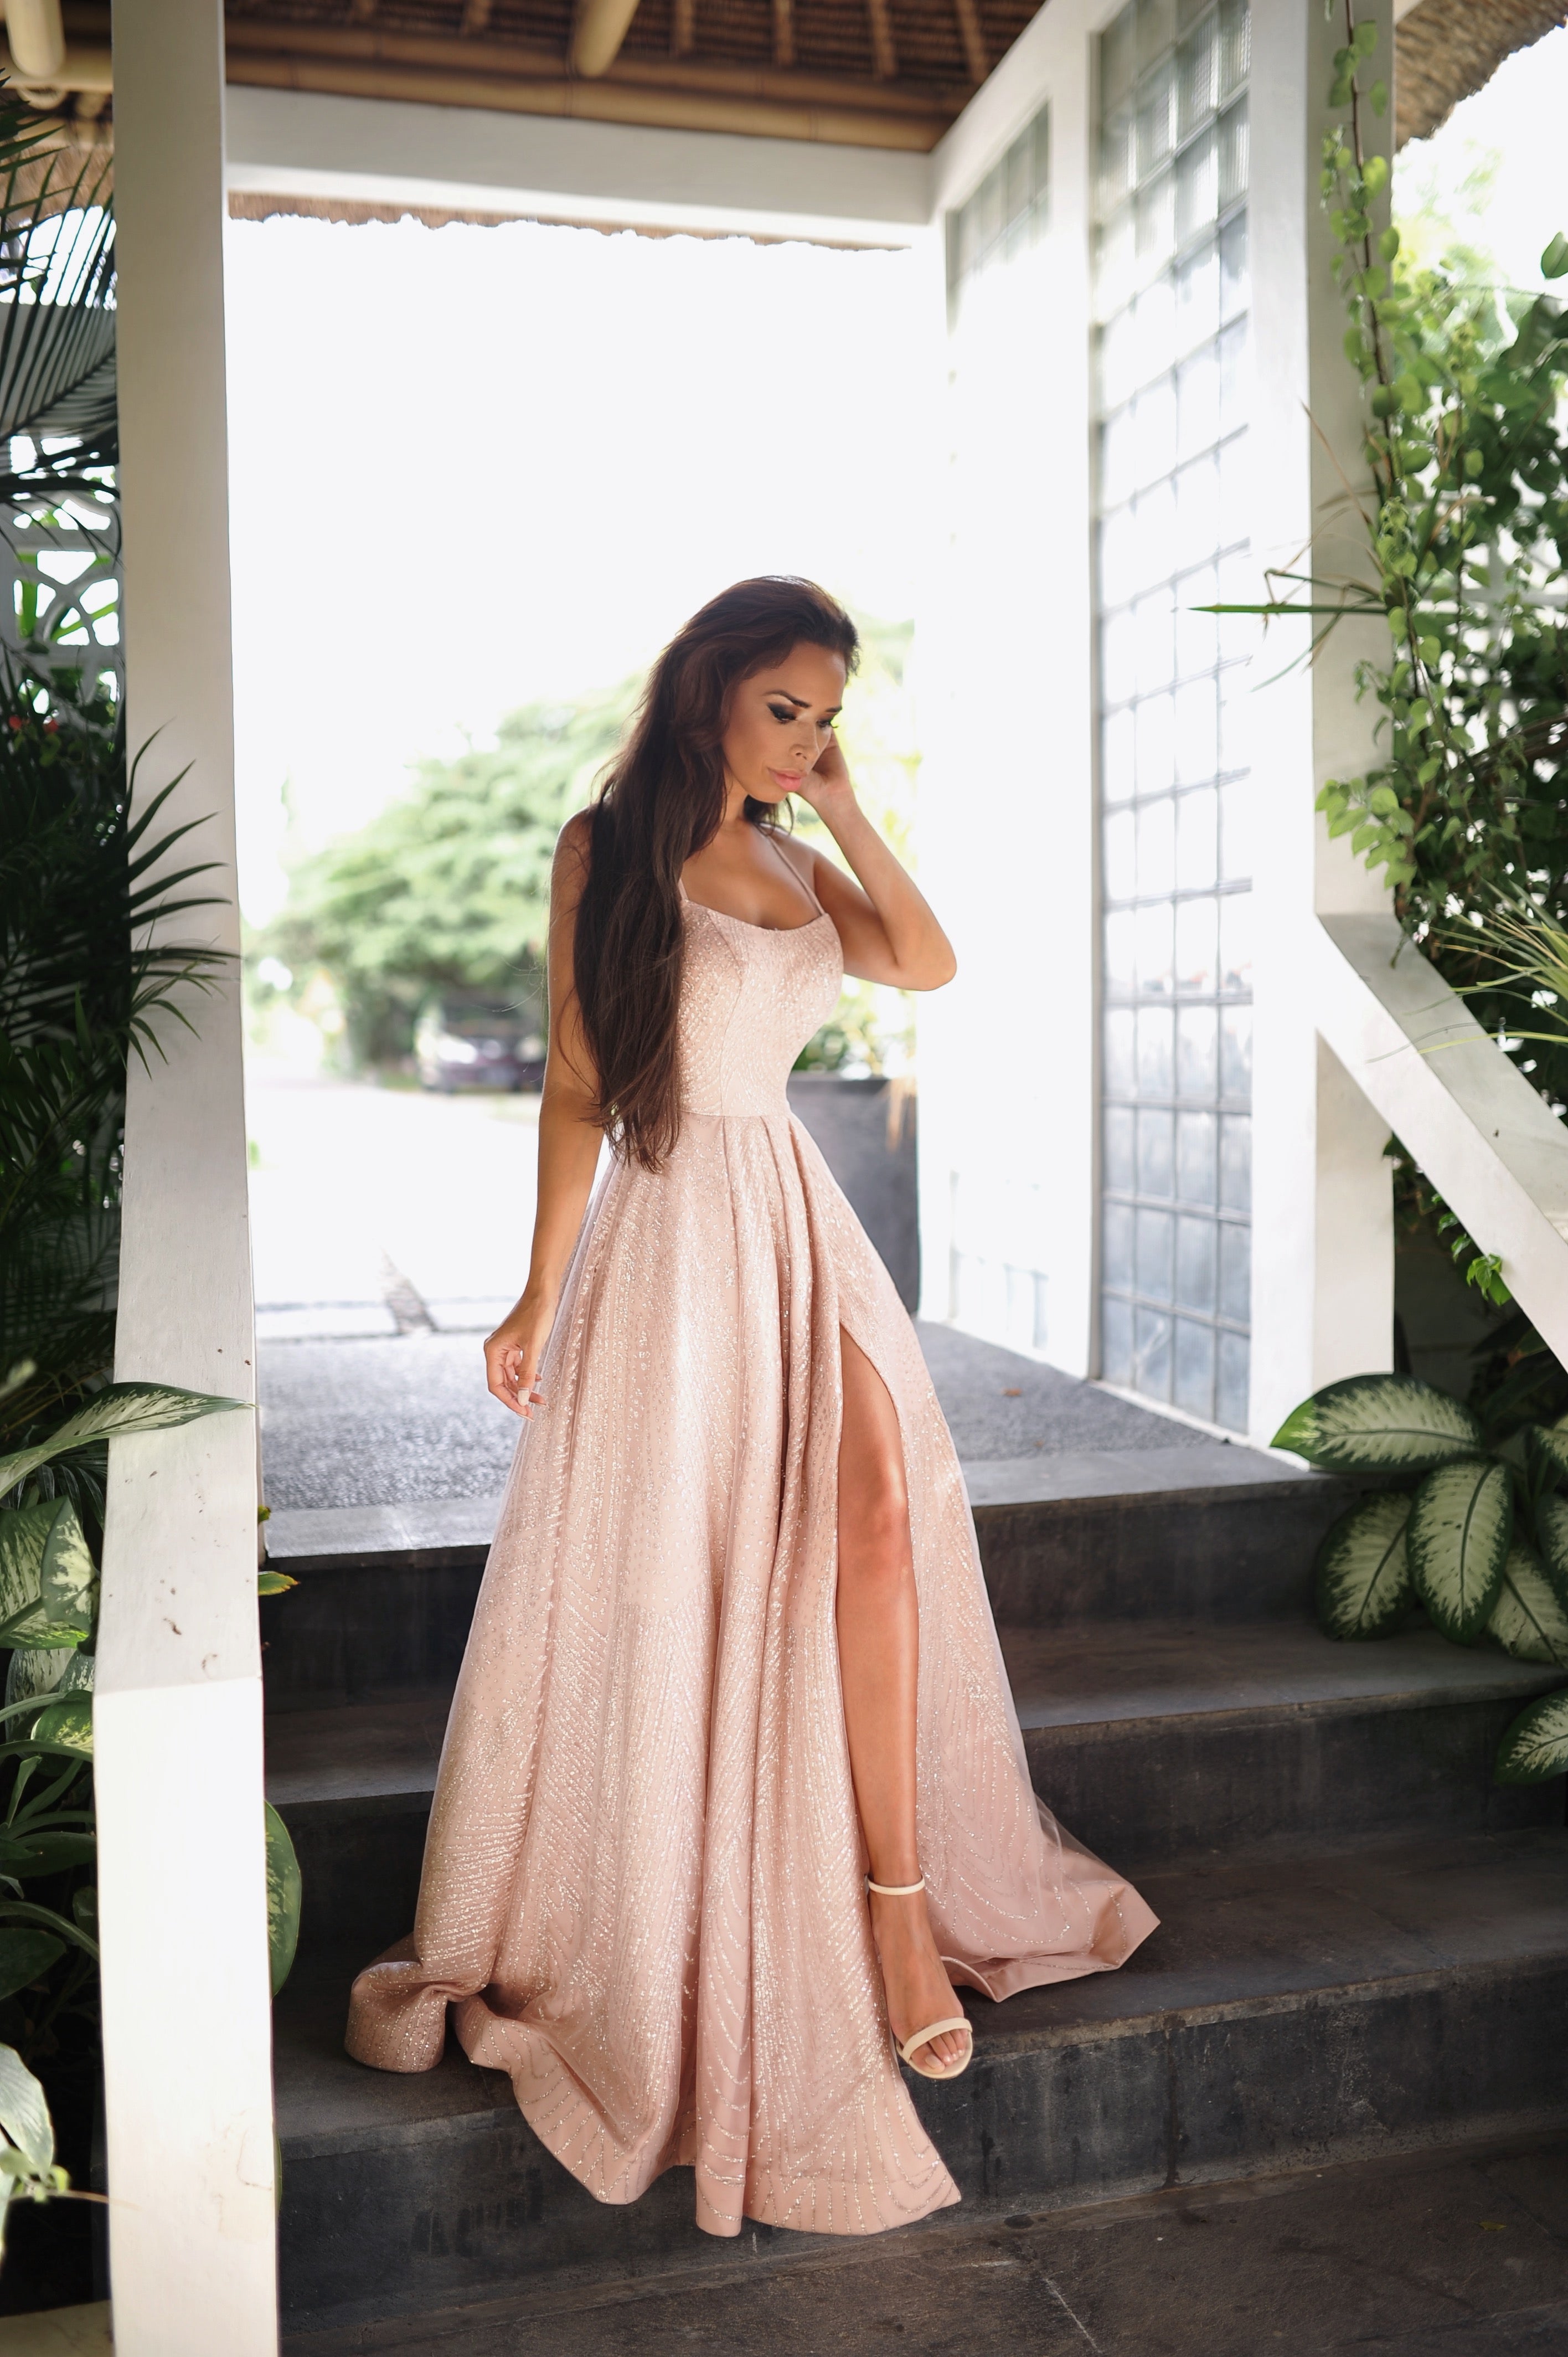 Tinaholy Couture T18262 Rose Pink Glitter Ball Gown Formal Dress Tina Holly Couture$ AfterPay Humm ZipPay LayBuy Sezzle